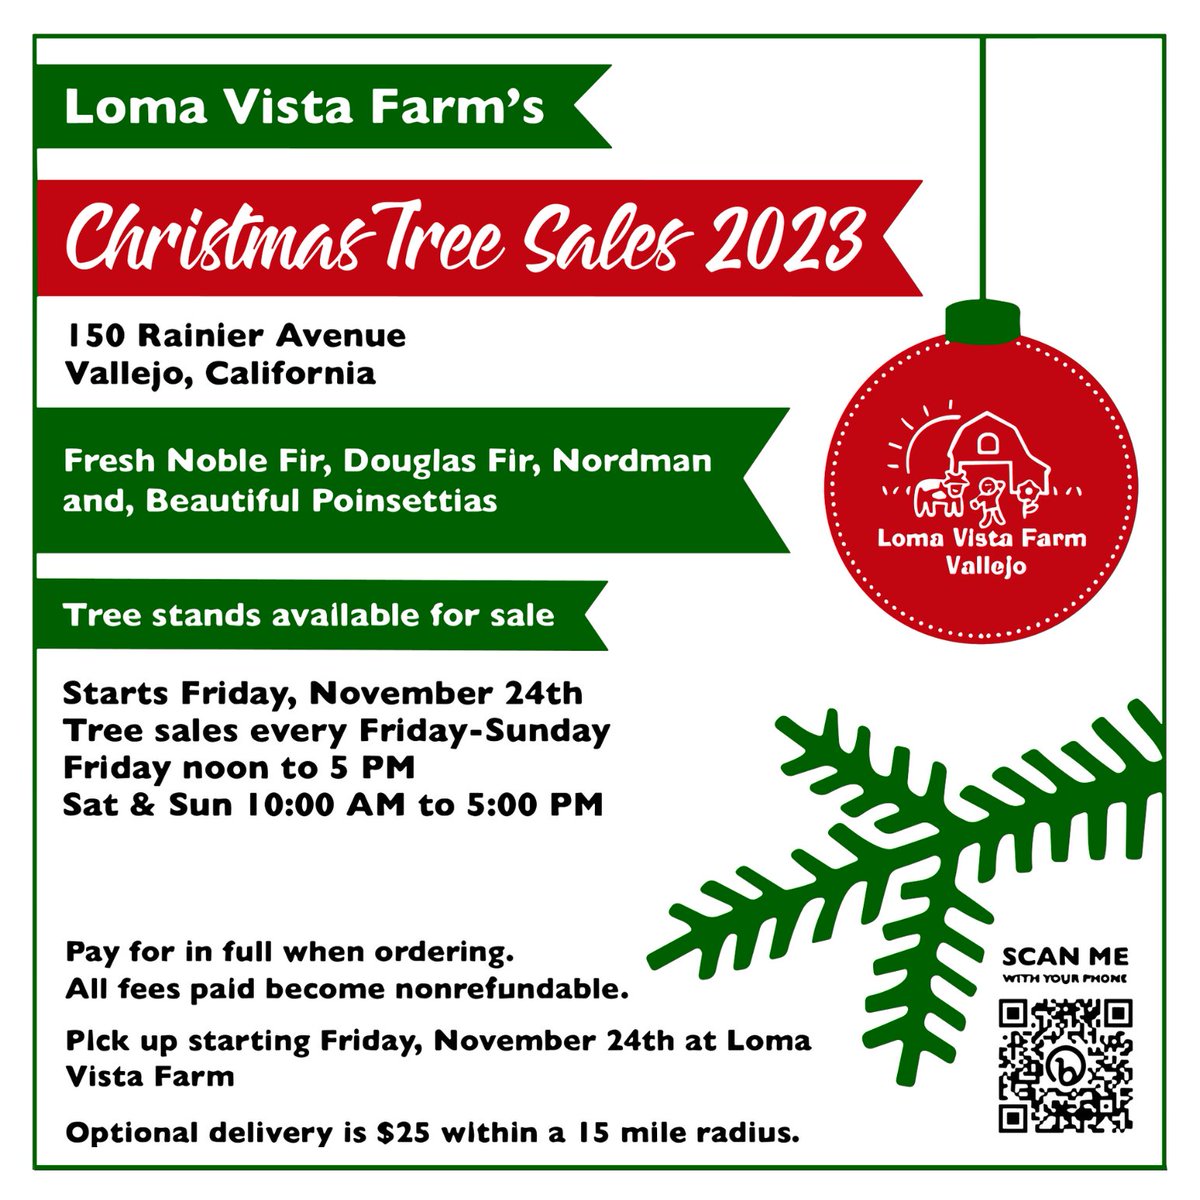 Buy your Christmas tree today at Loma Vista Farm's Christmas Tree Sales event! For more information or to buy your tree now, visit FriendsOfLomaVistaFarm.org/Store/Pre-sales Picked up NO LATER than 12/3/2023